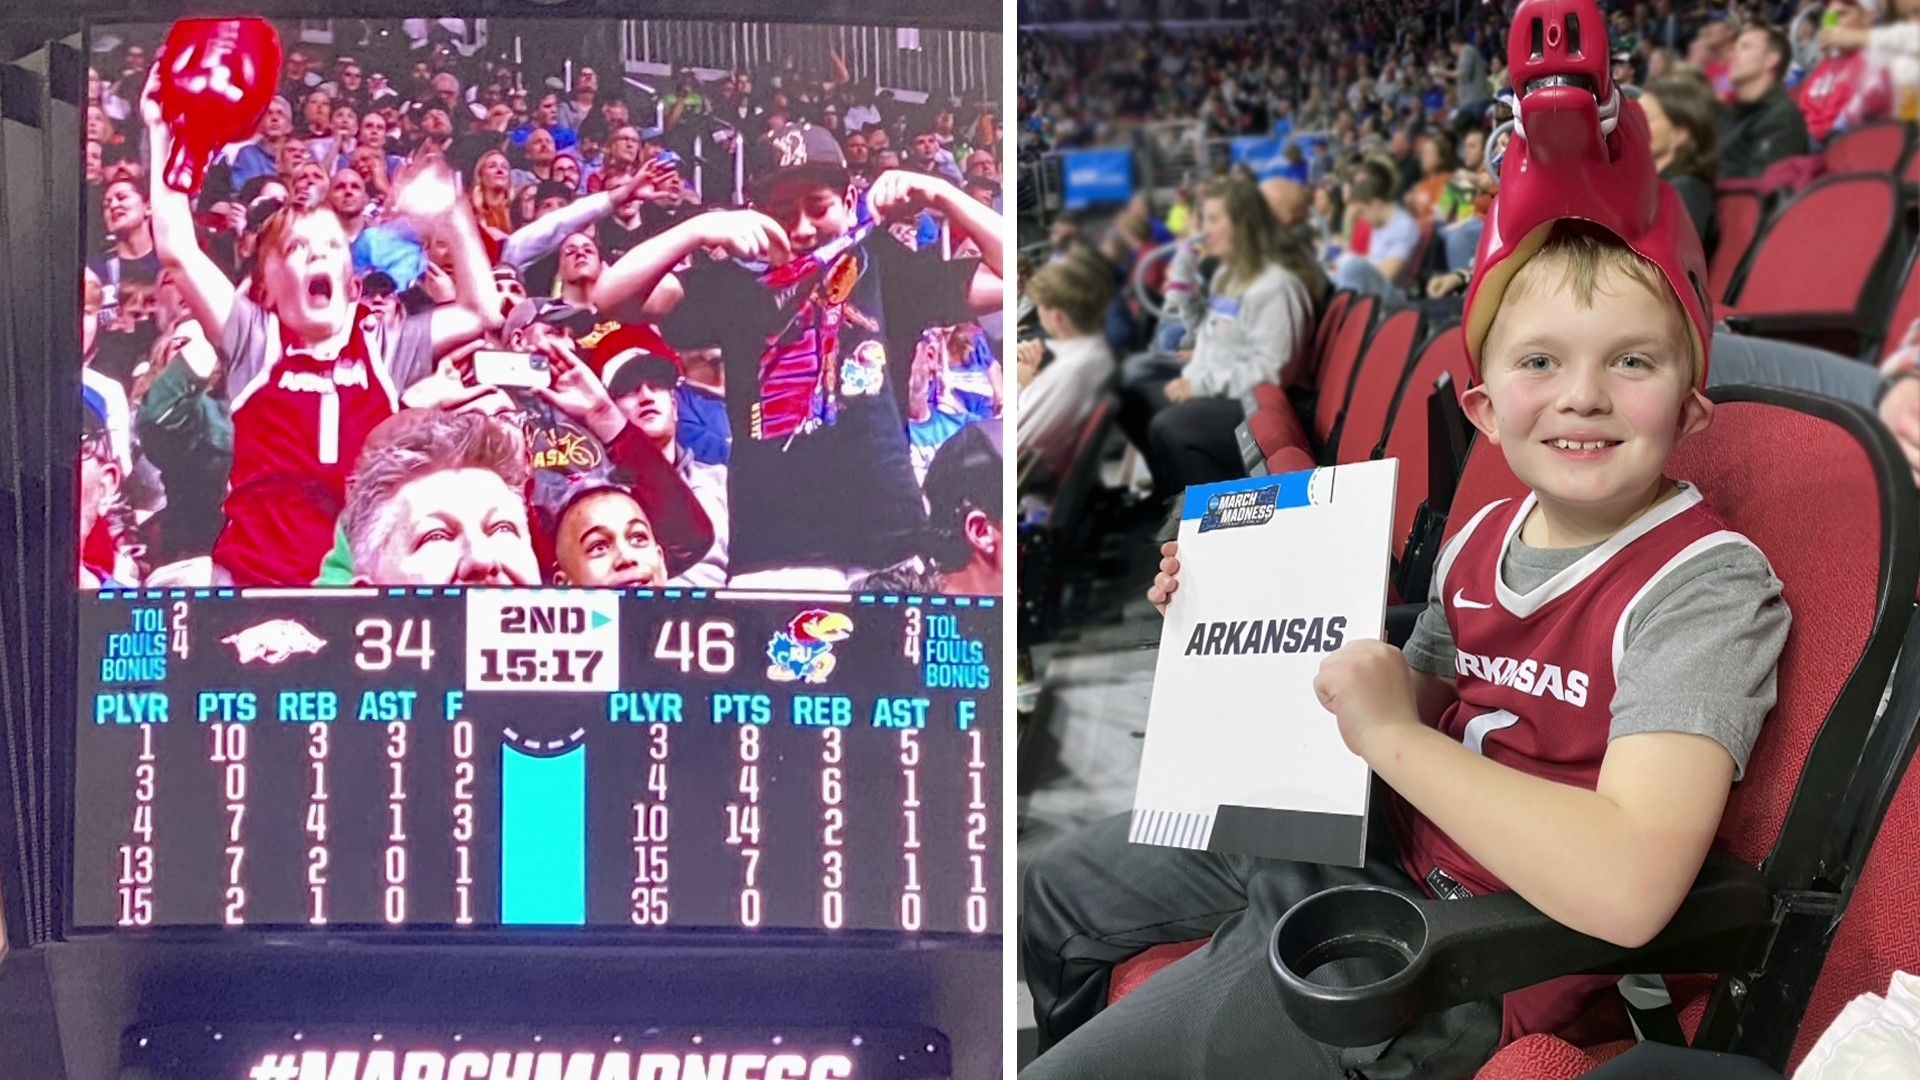 10-year-old Jude Stadler cheered the Hogs on in Kansas and now he's headed to watch them play in the Sweet 16 after a huge surprise from his parents! ❤️